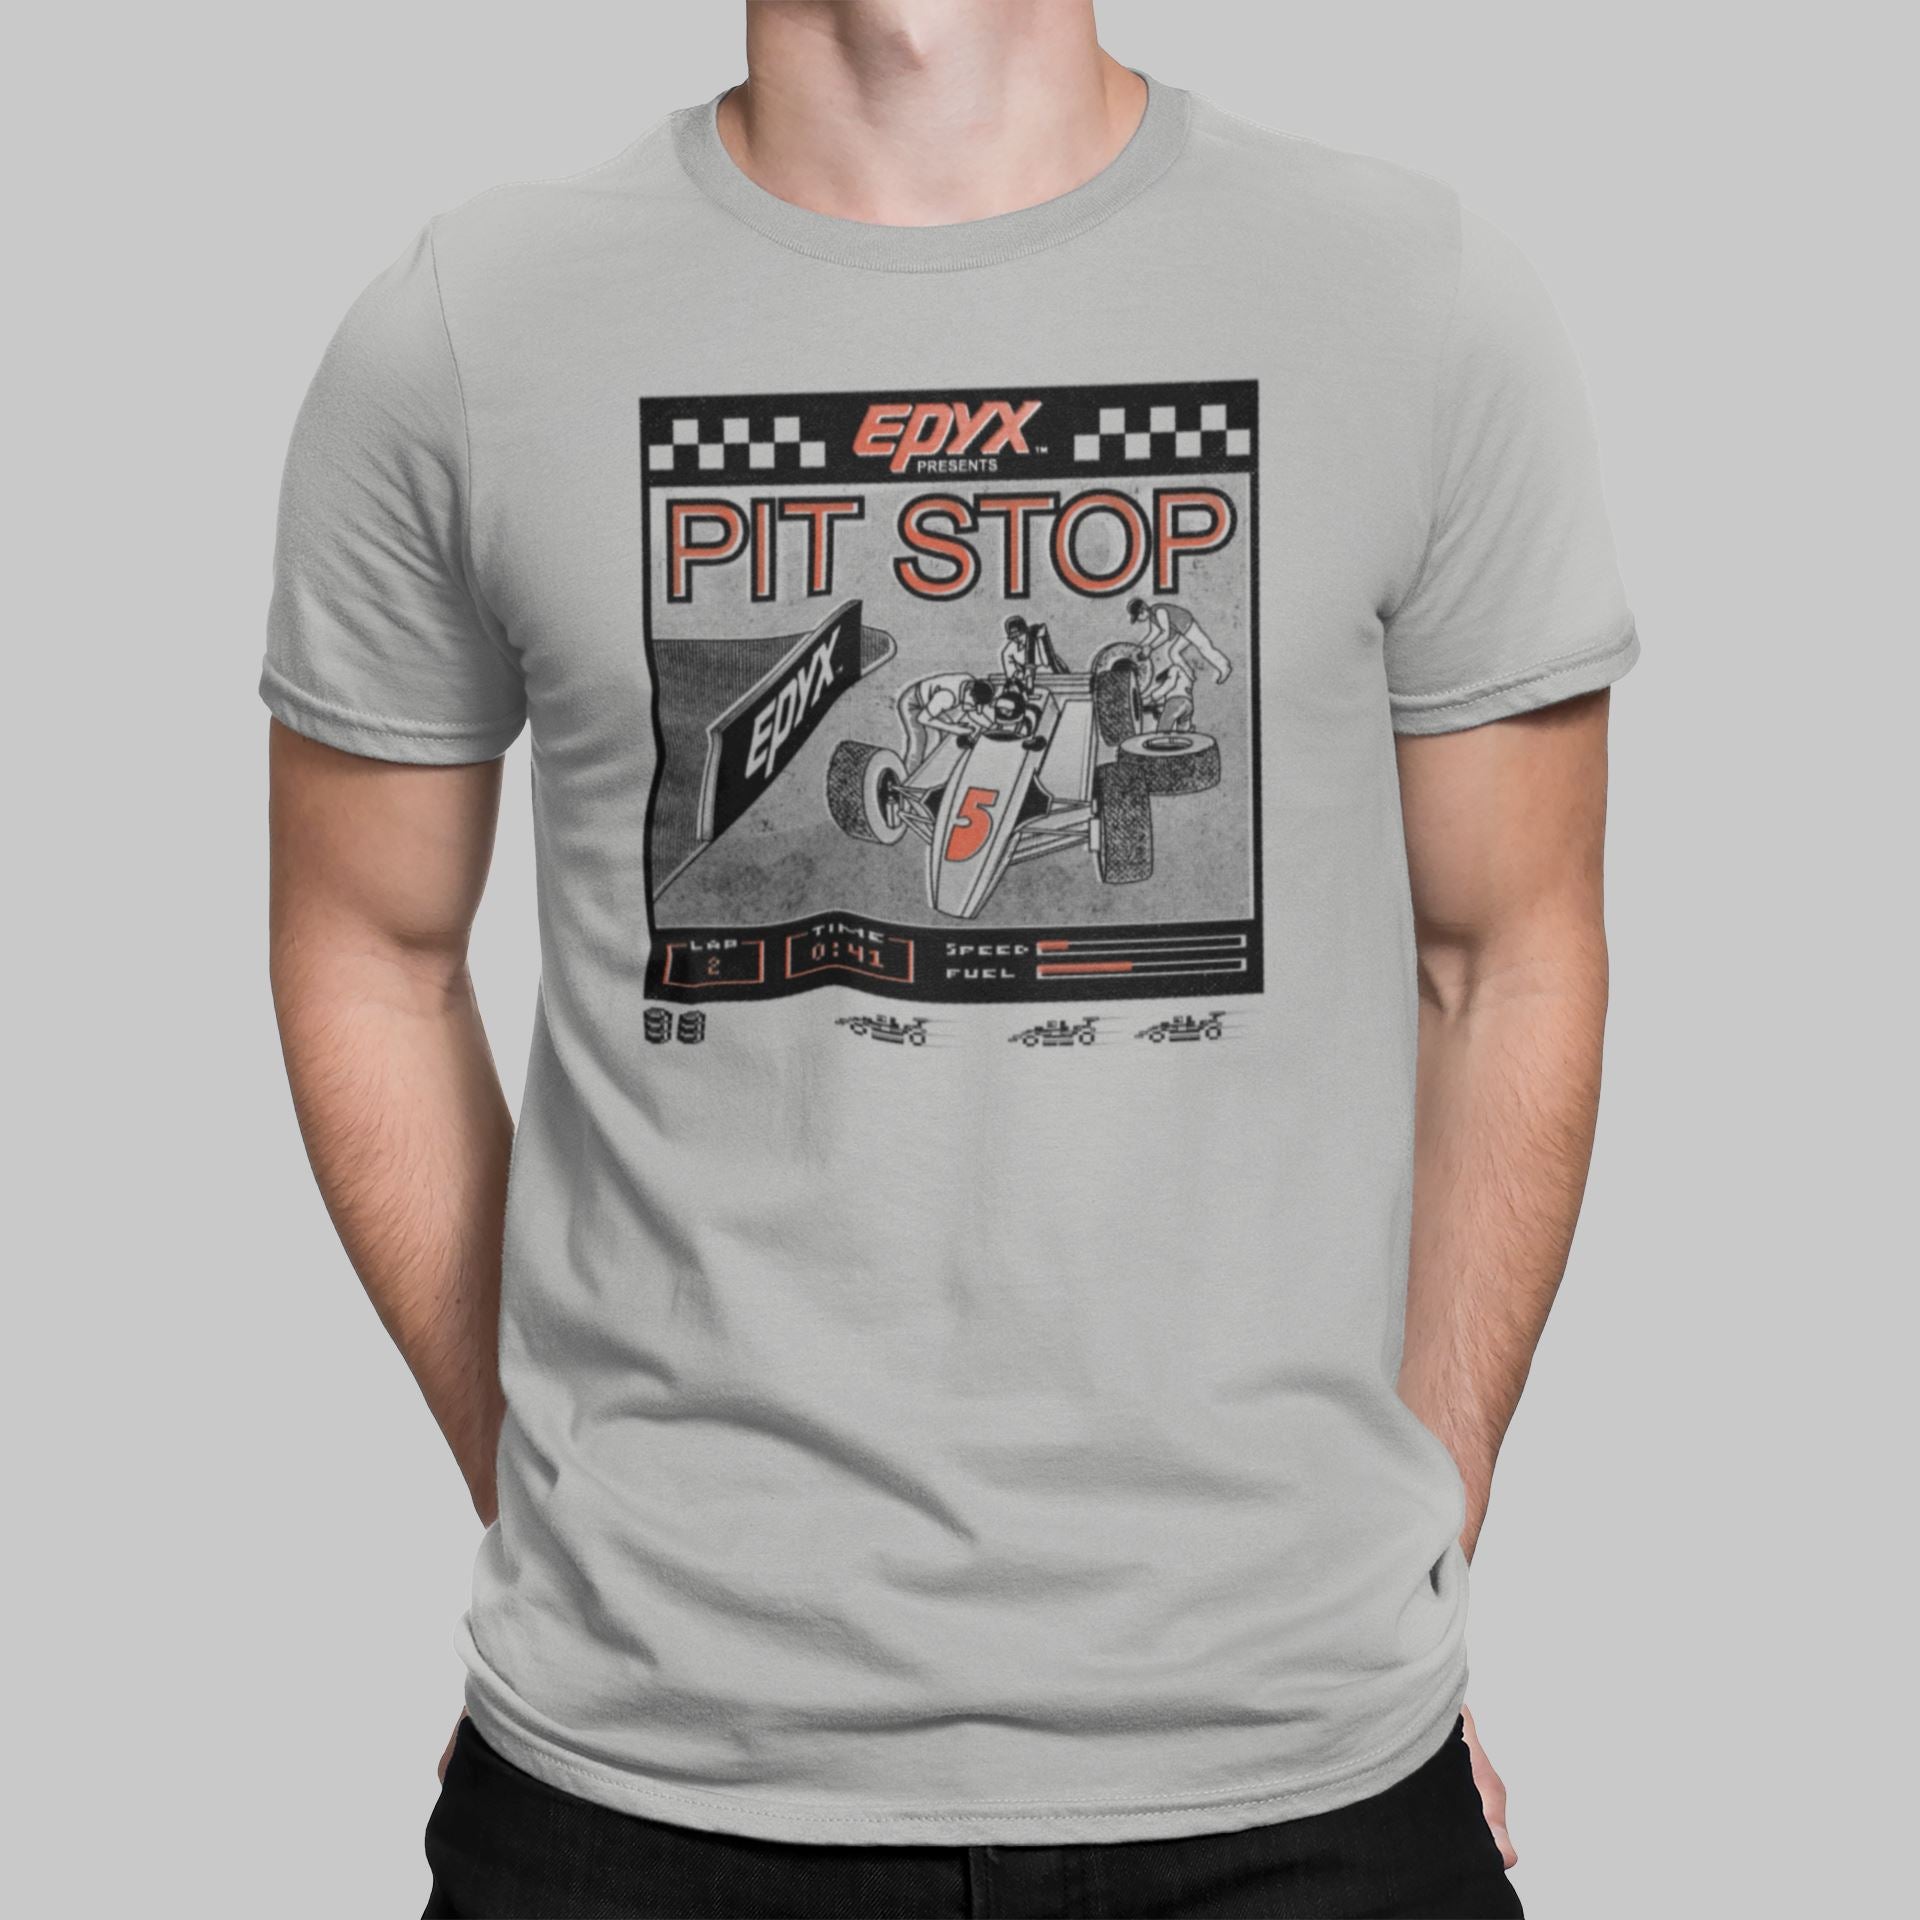 Pit Stop Retro Gaming T-Shirt T-Shirt Seven Squared Small 34-36" Pale Grey 